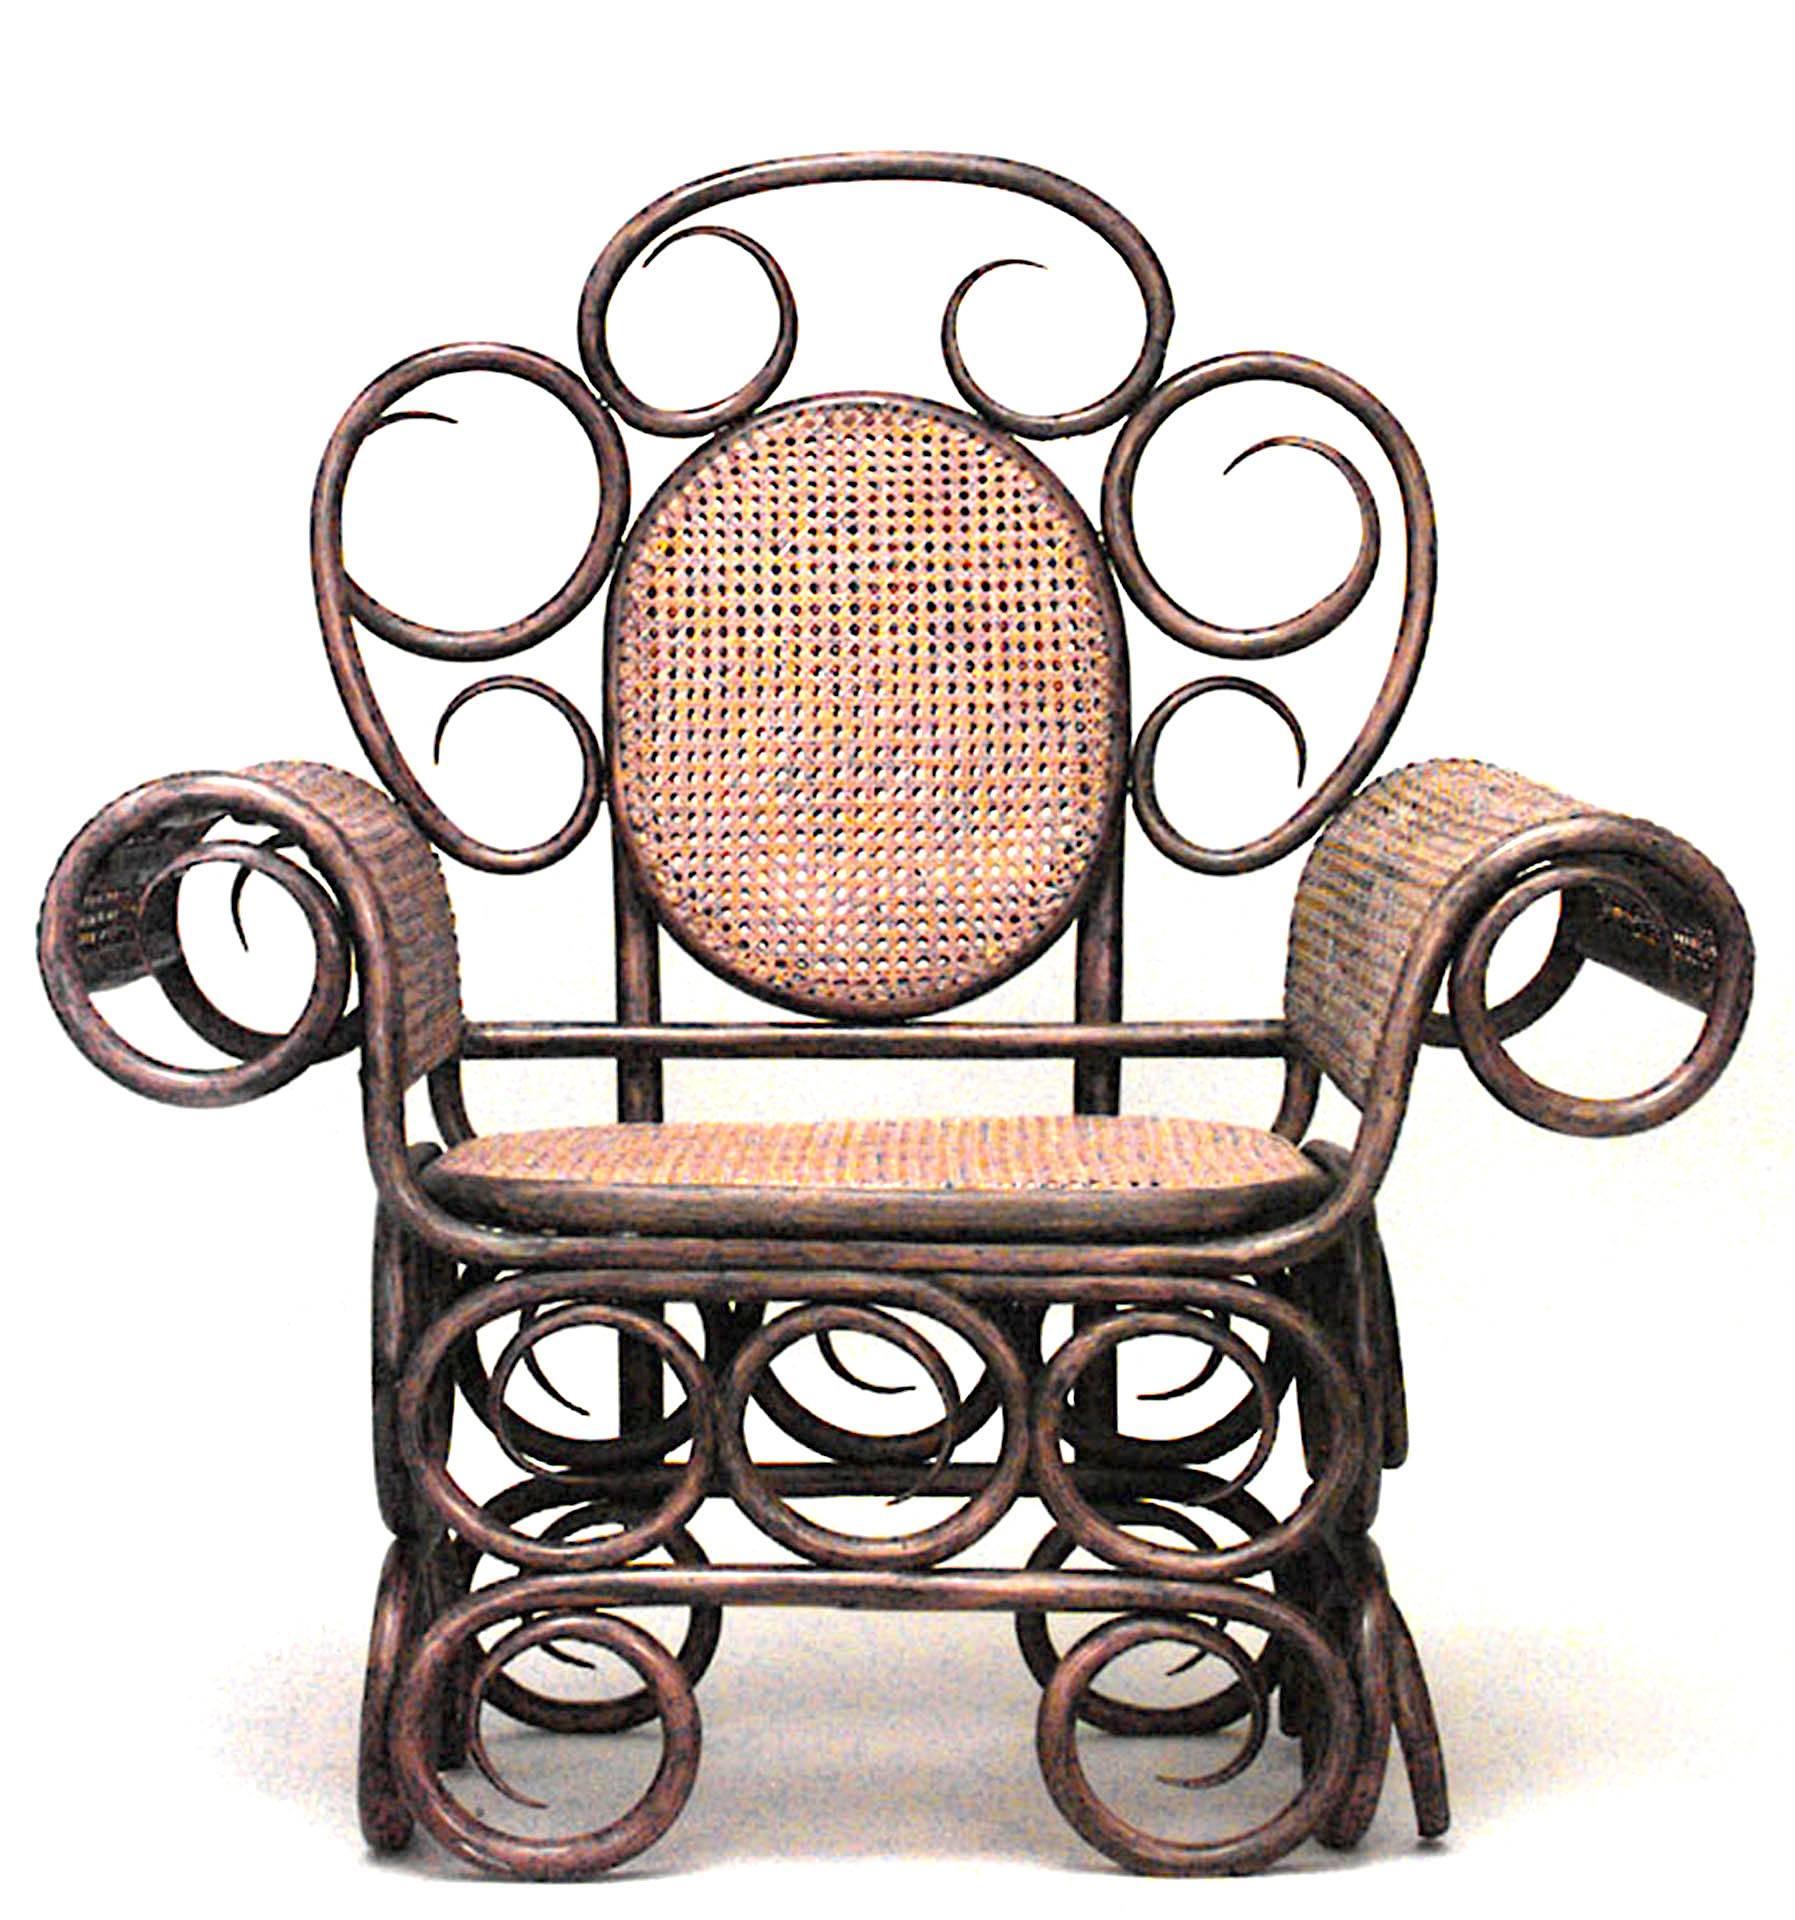 Austrian Bentwood (19th Cent) unusual scroll design roll arm chair with cane panels.
